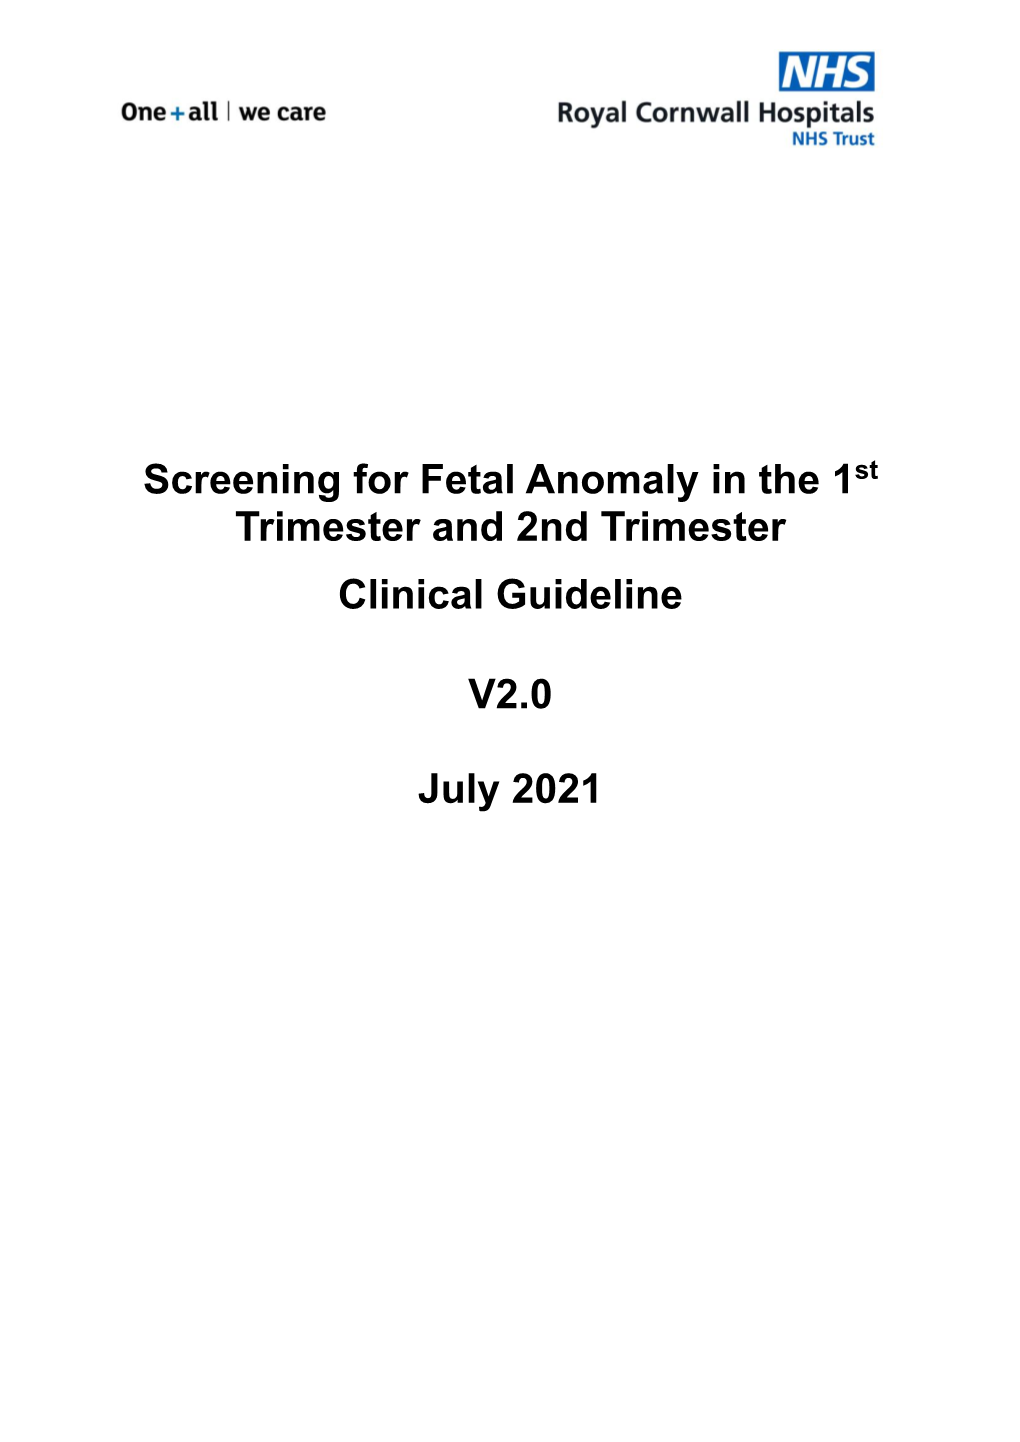 Screening for Fetal Anomaly in the 1St Trimester and 2Nd Trimester Clinical Guideline